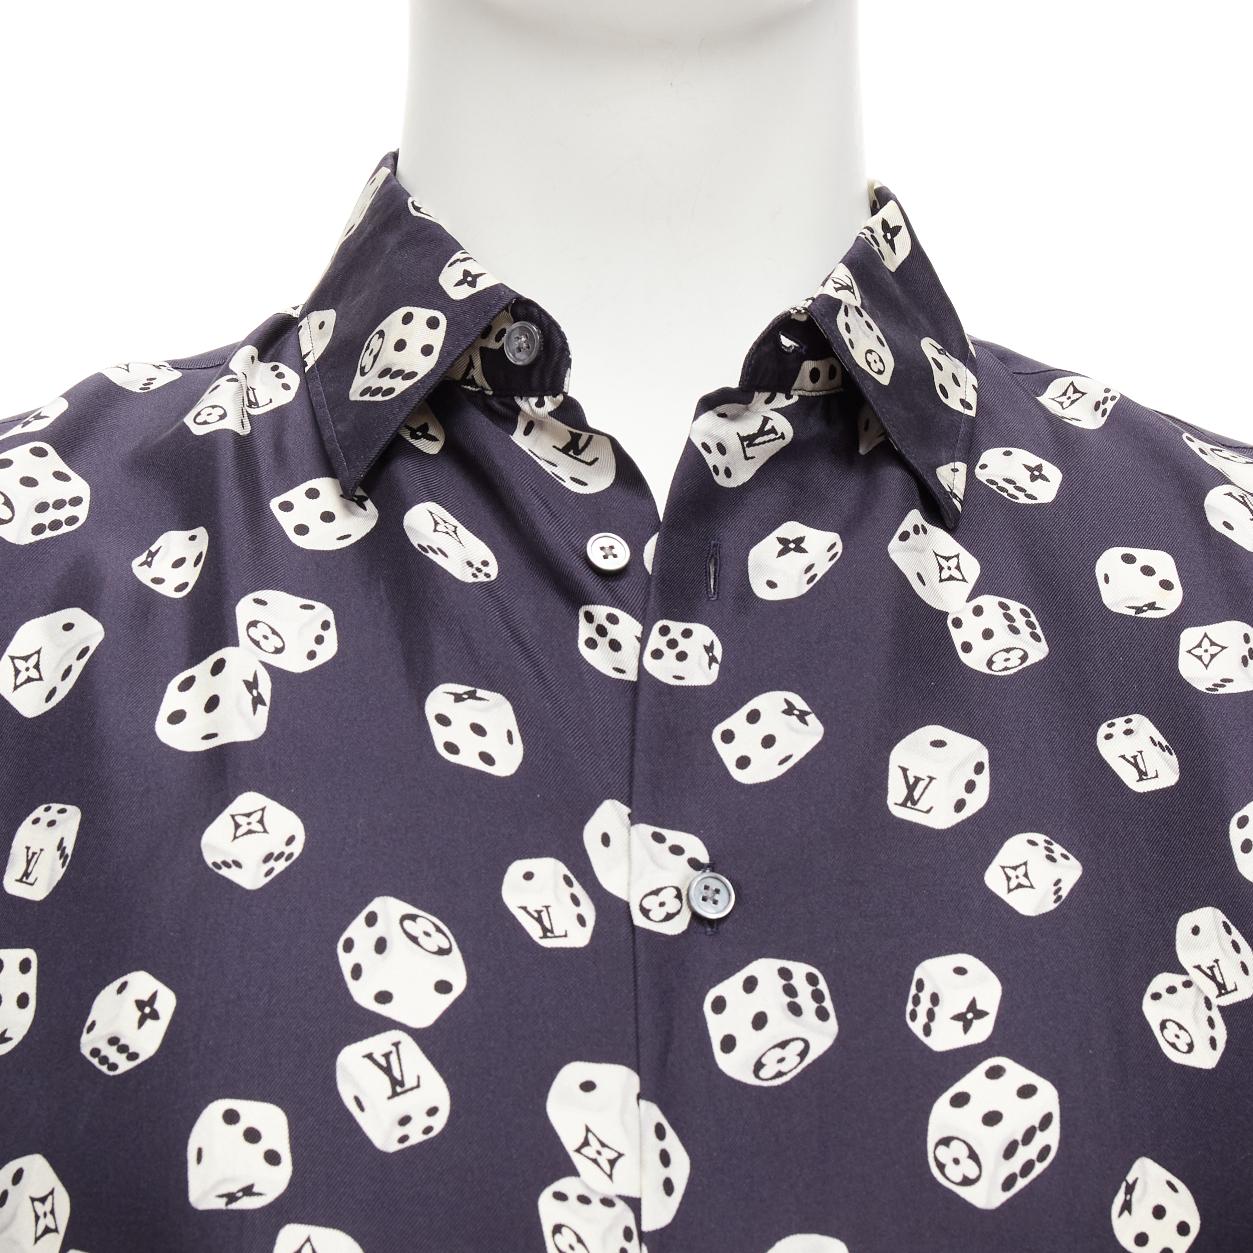 LOUIS VUITTON navy cream 100% silk LV logo dice print regular fit shirt M
Reference: TGAS/D01122
Brand: Louis Vuitton
Material: Silk
Color: Navy, Cream
Pattern: Abstract
Closure: Button
Extra Details: Similar print at back.

CONDITION:
Condition: